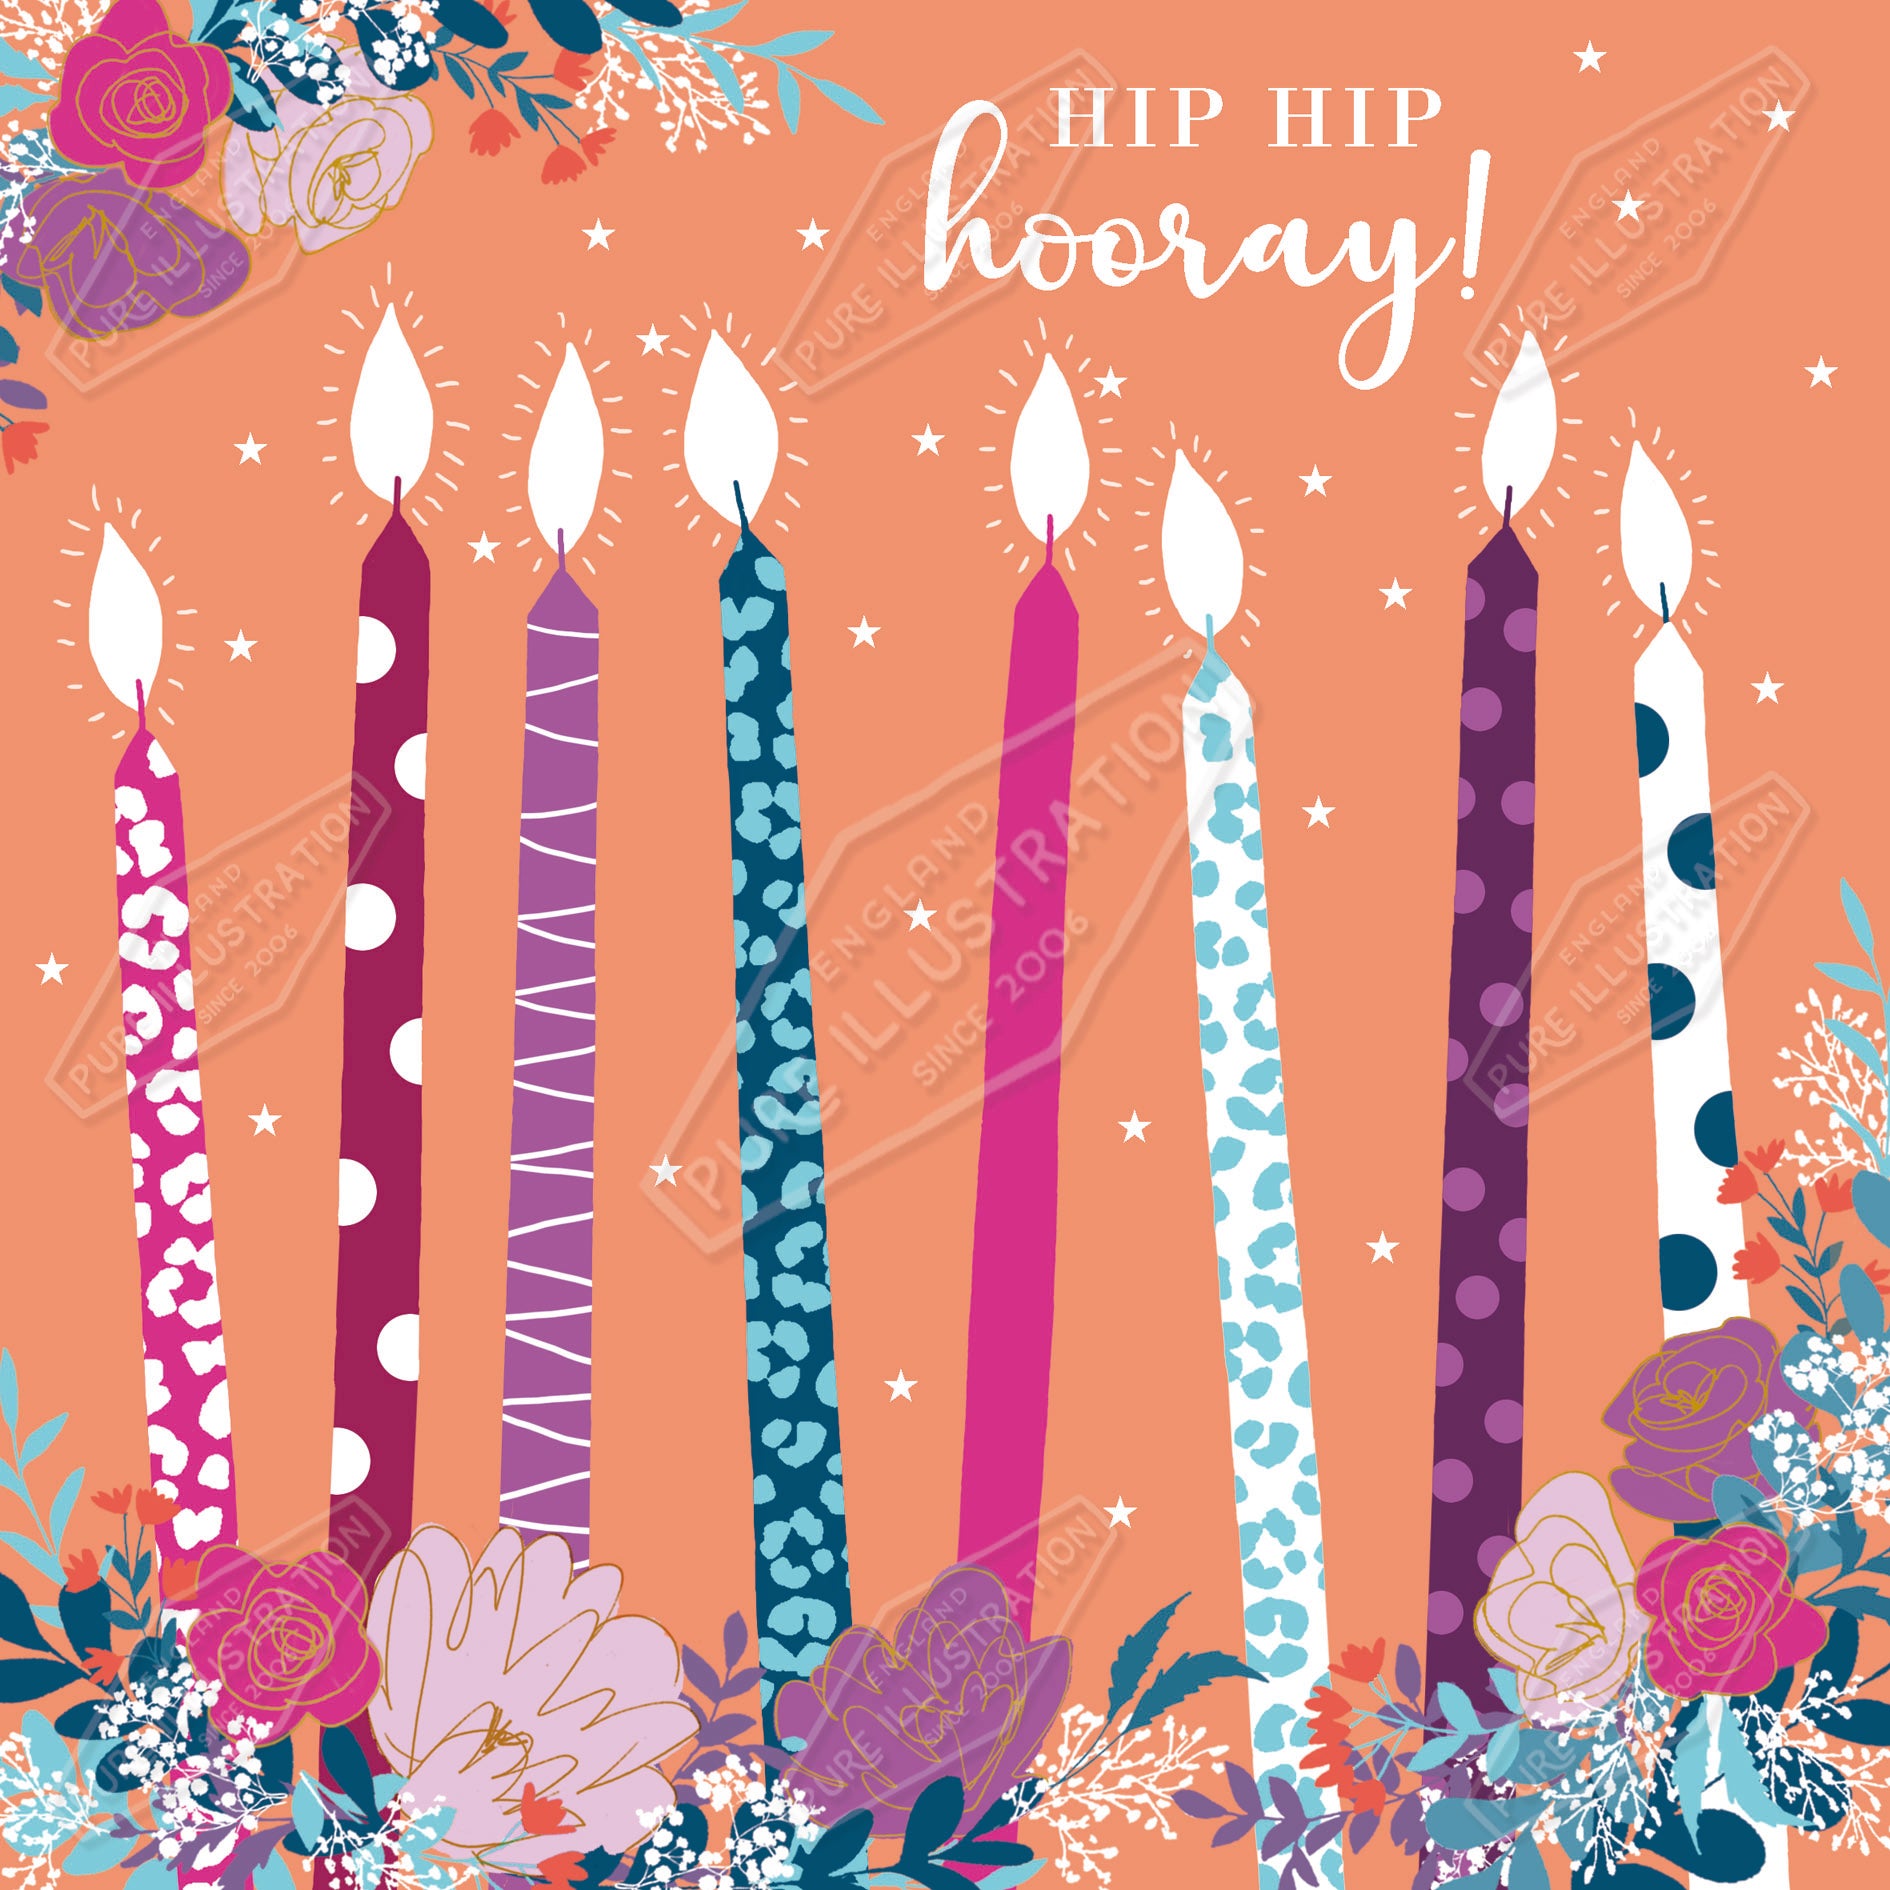 00035462CMI - Caitlin Miller is represented by Pure Art Licensing Agency - Birthday Greeting Card Design